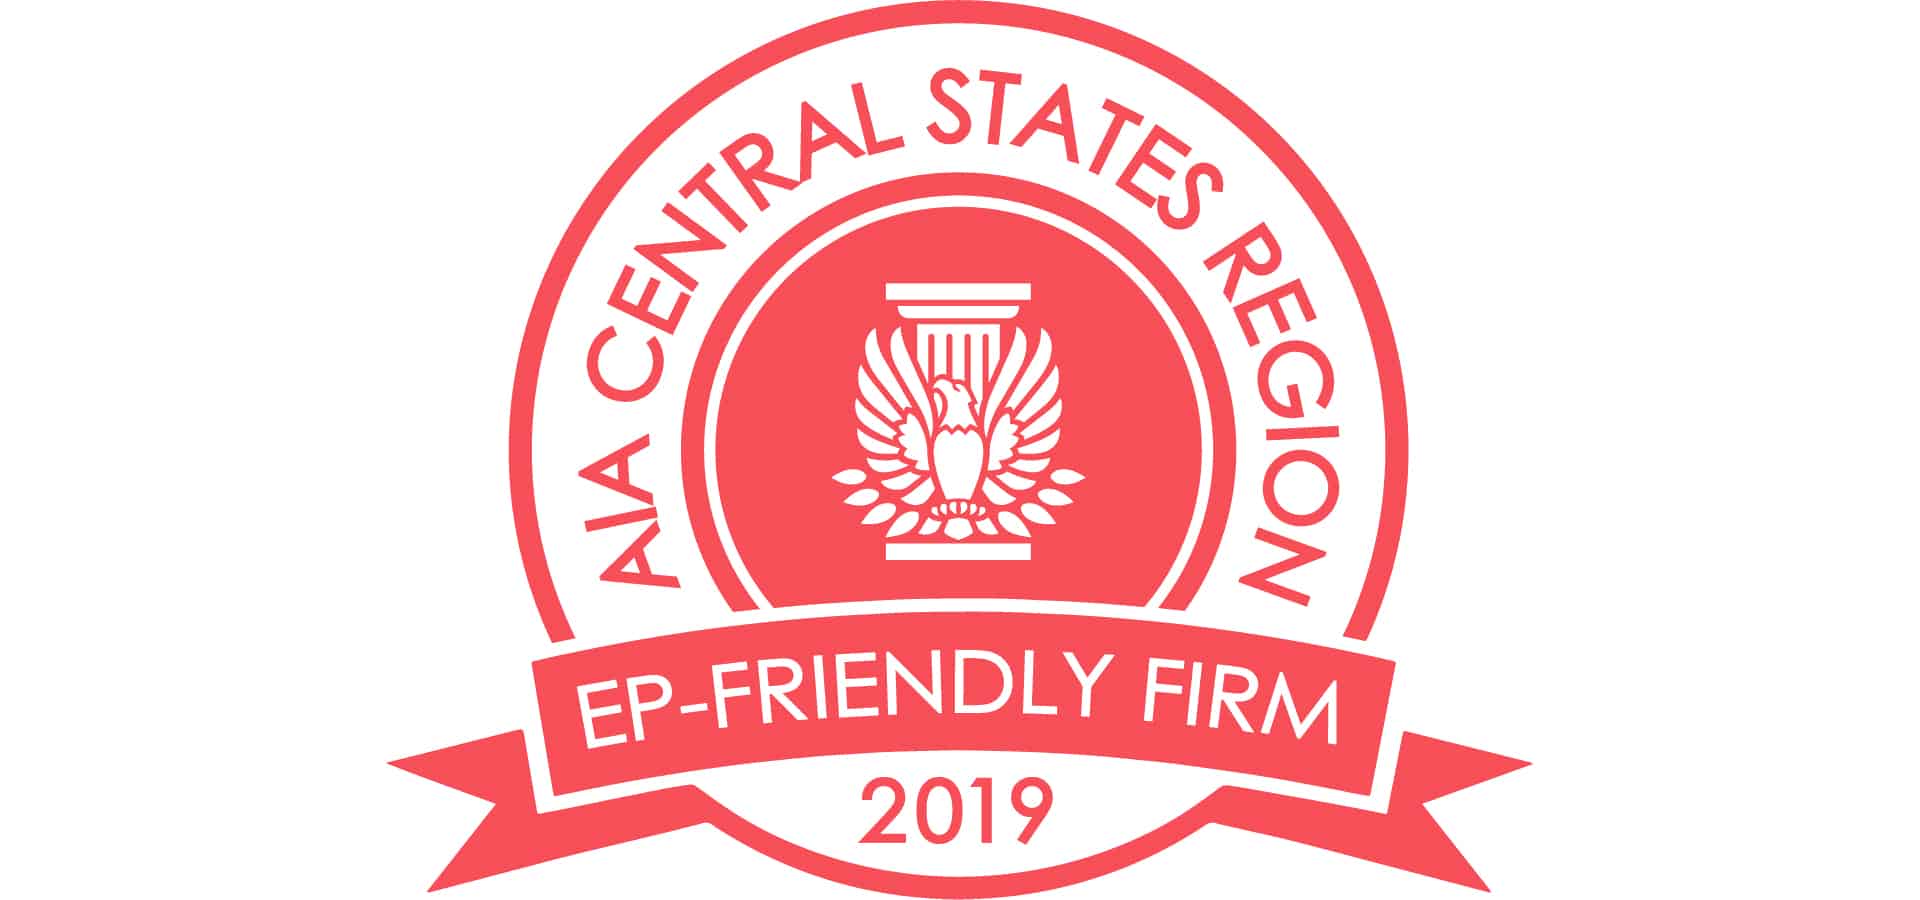 AIA Central States Region EP Friendly Firm 2019 Badge